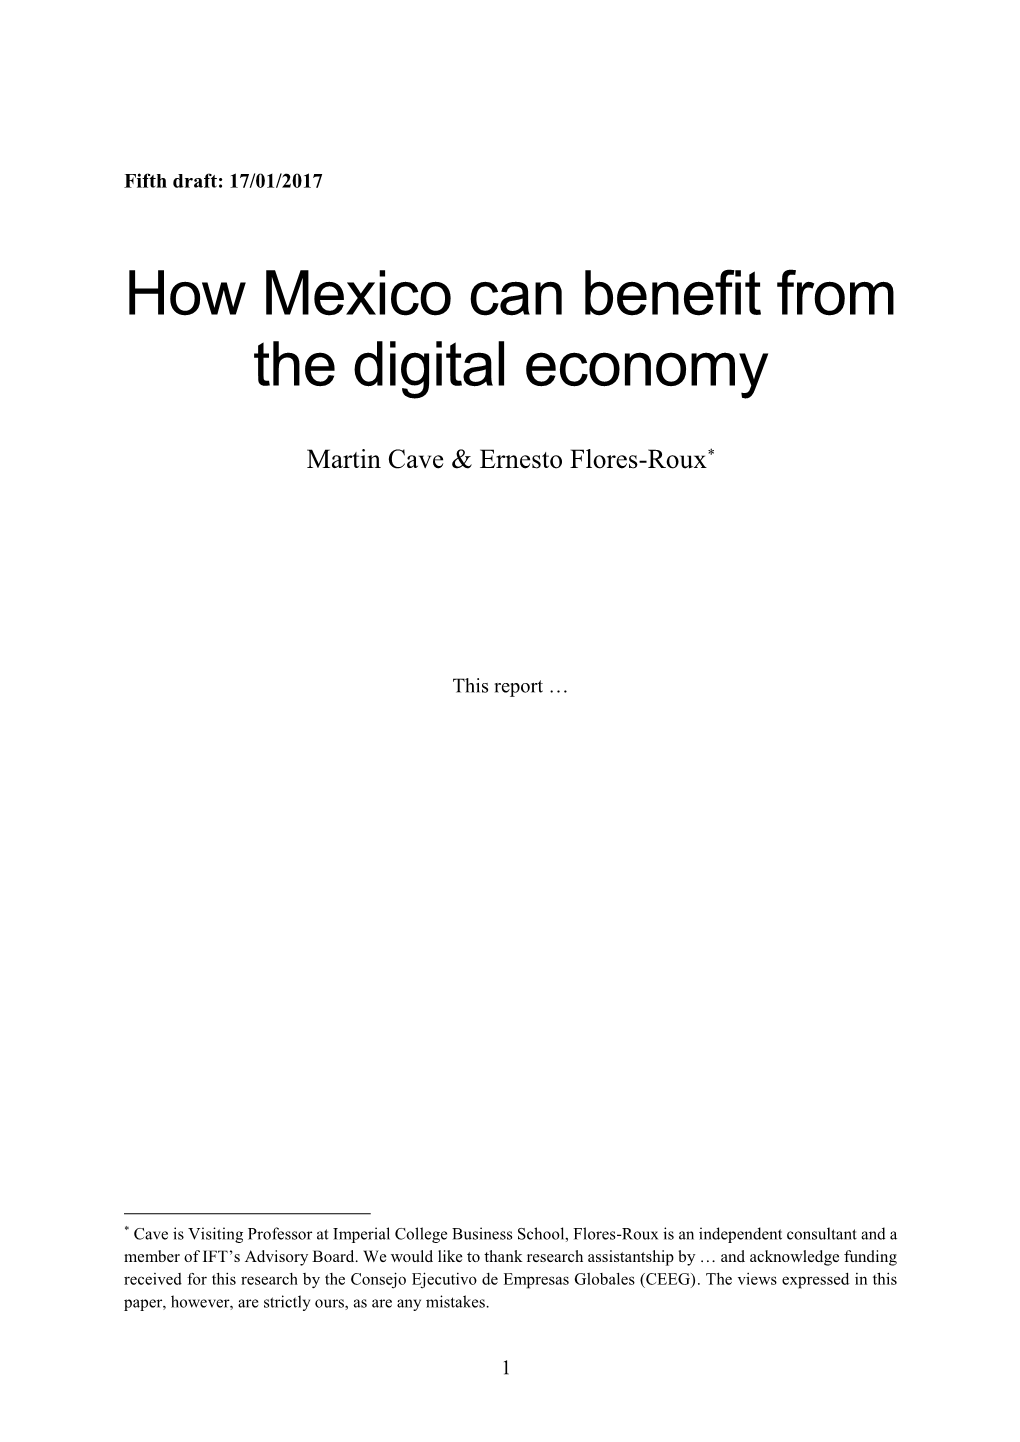 How Mexico Can Benefit from the Digital Economy